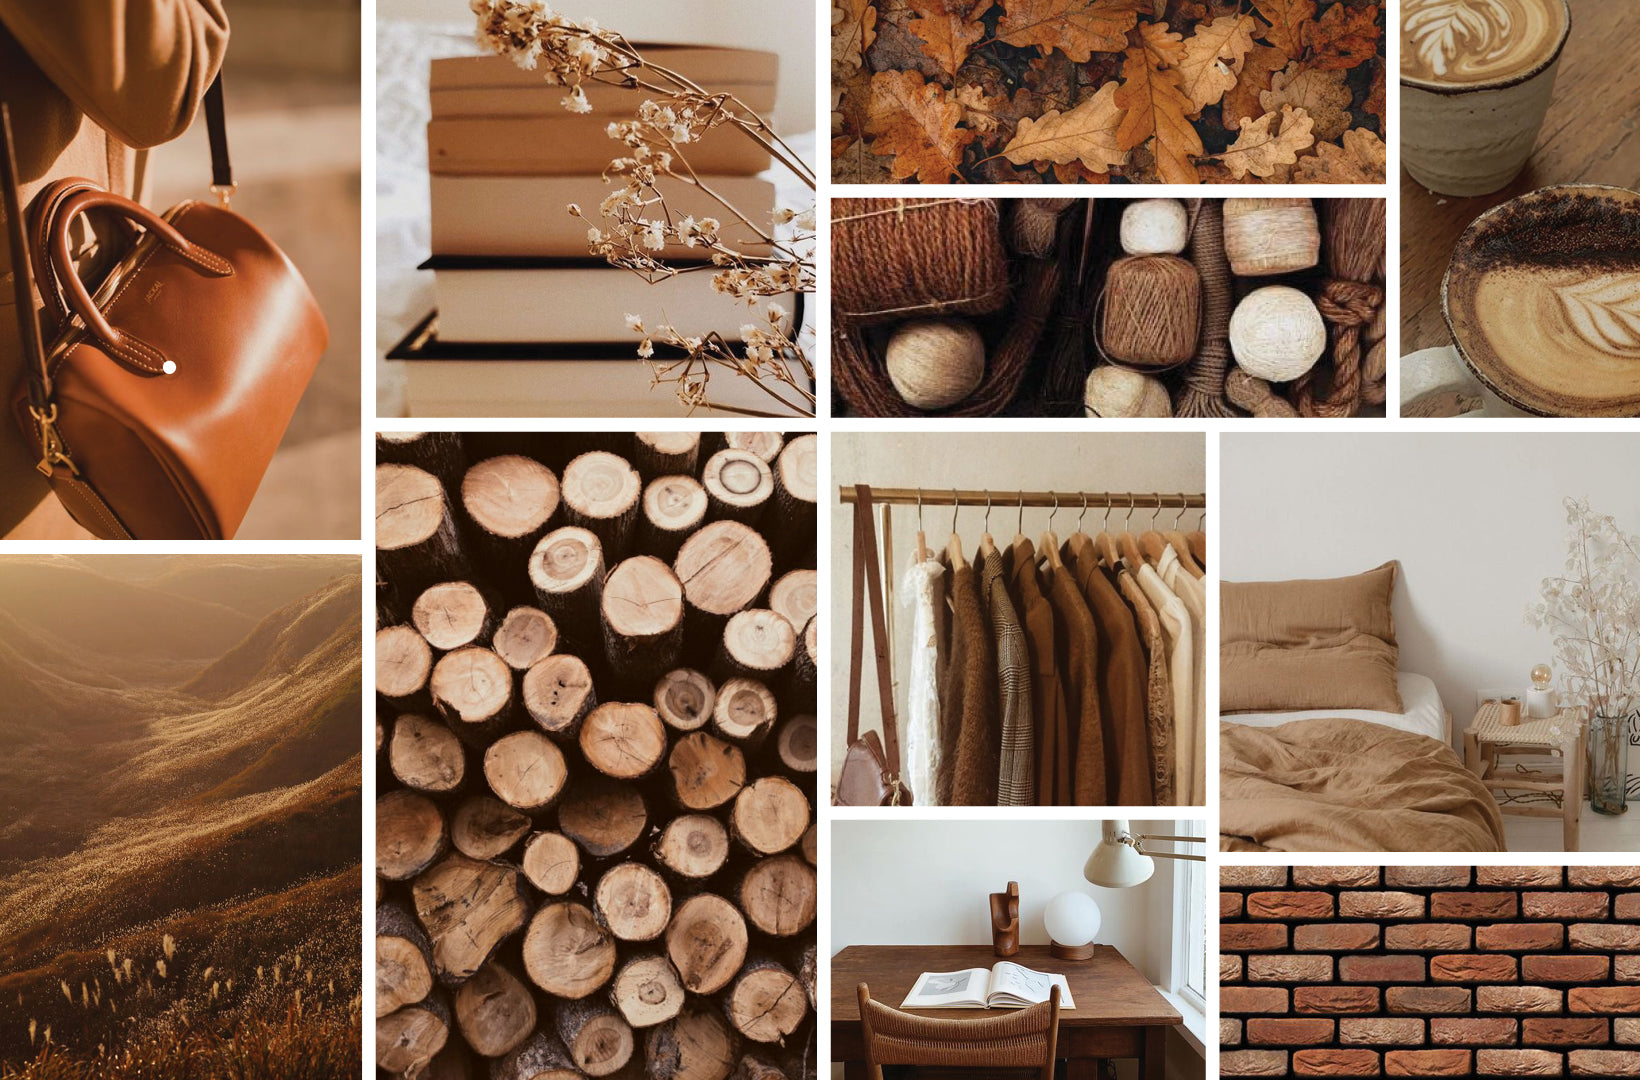 A collage of brown images including various hardwoods serves as an inspirational moldboard for our limited-edition fall color Teak